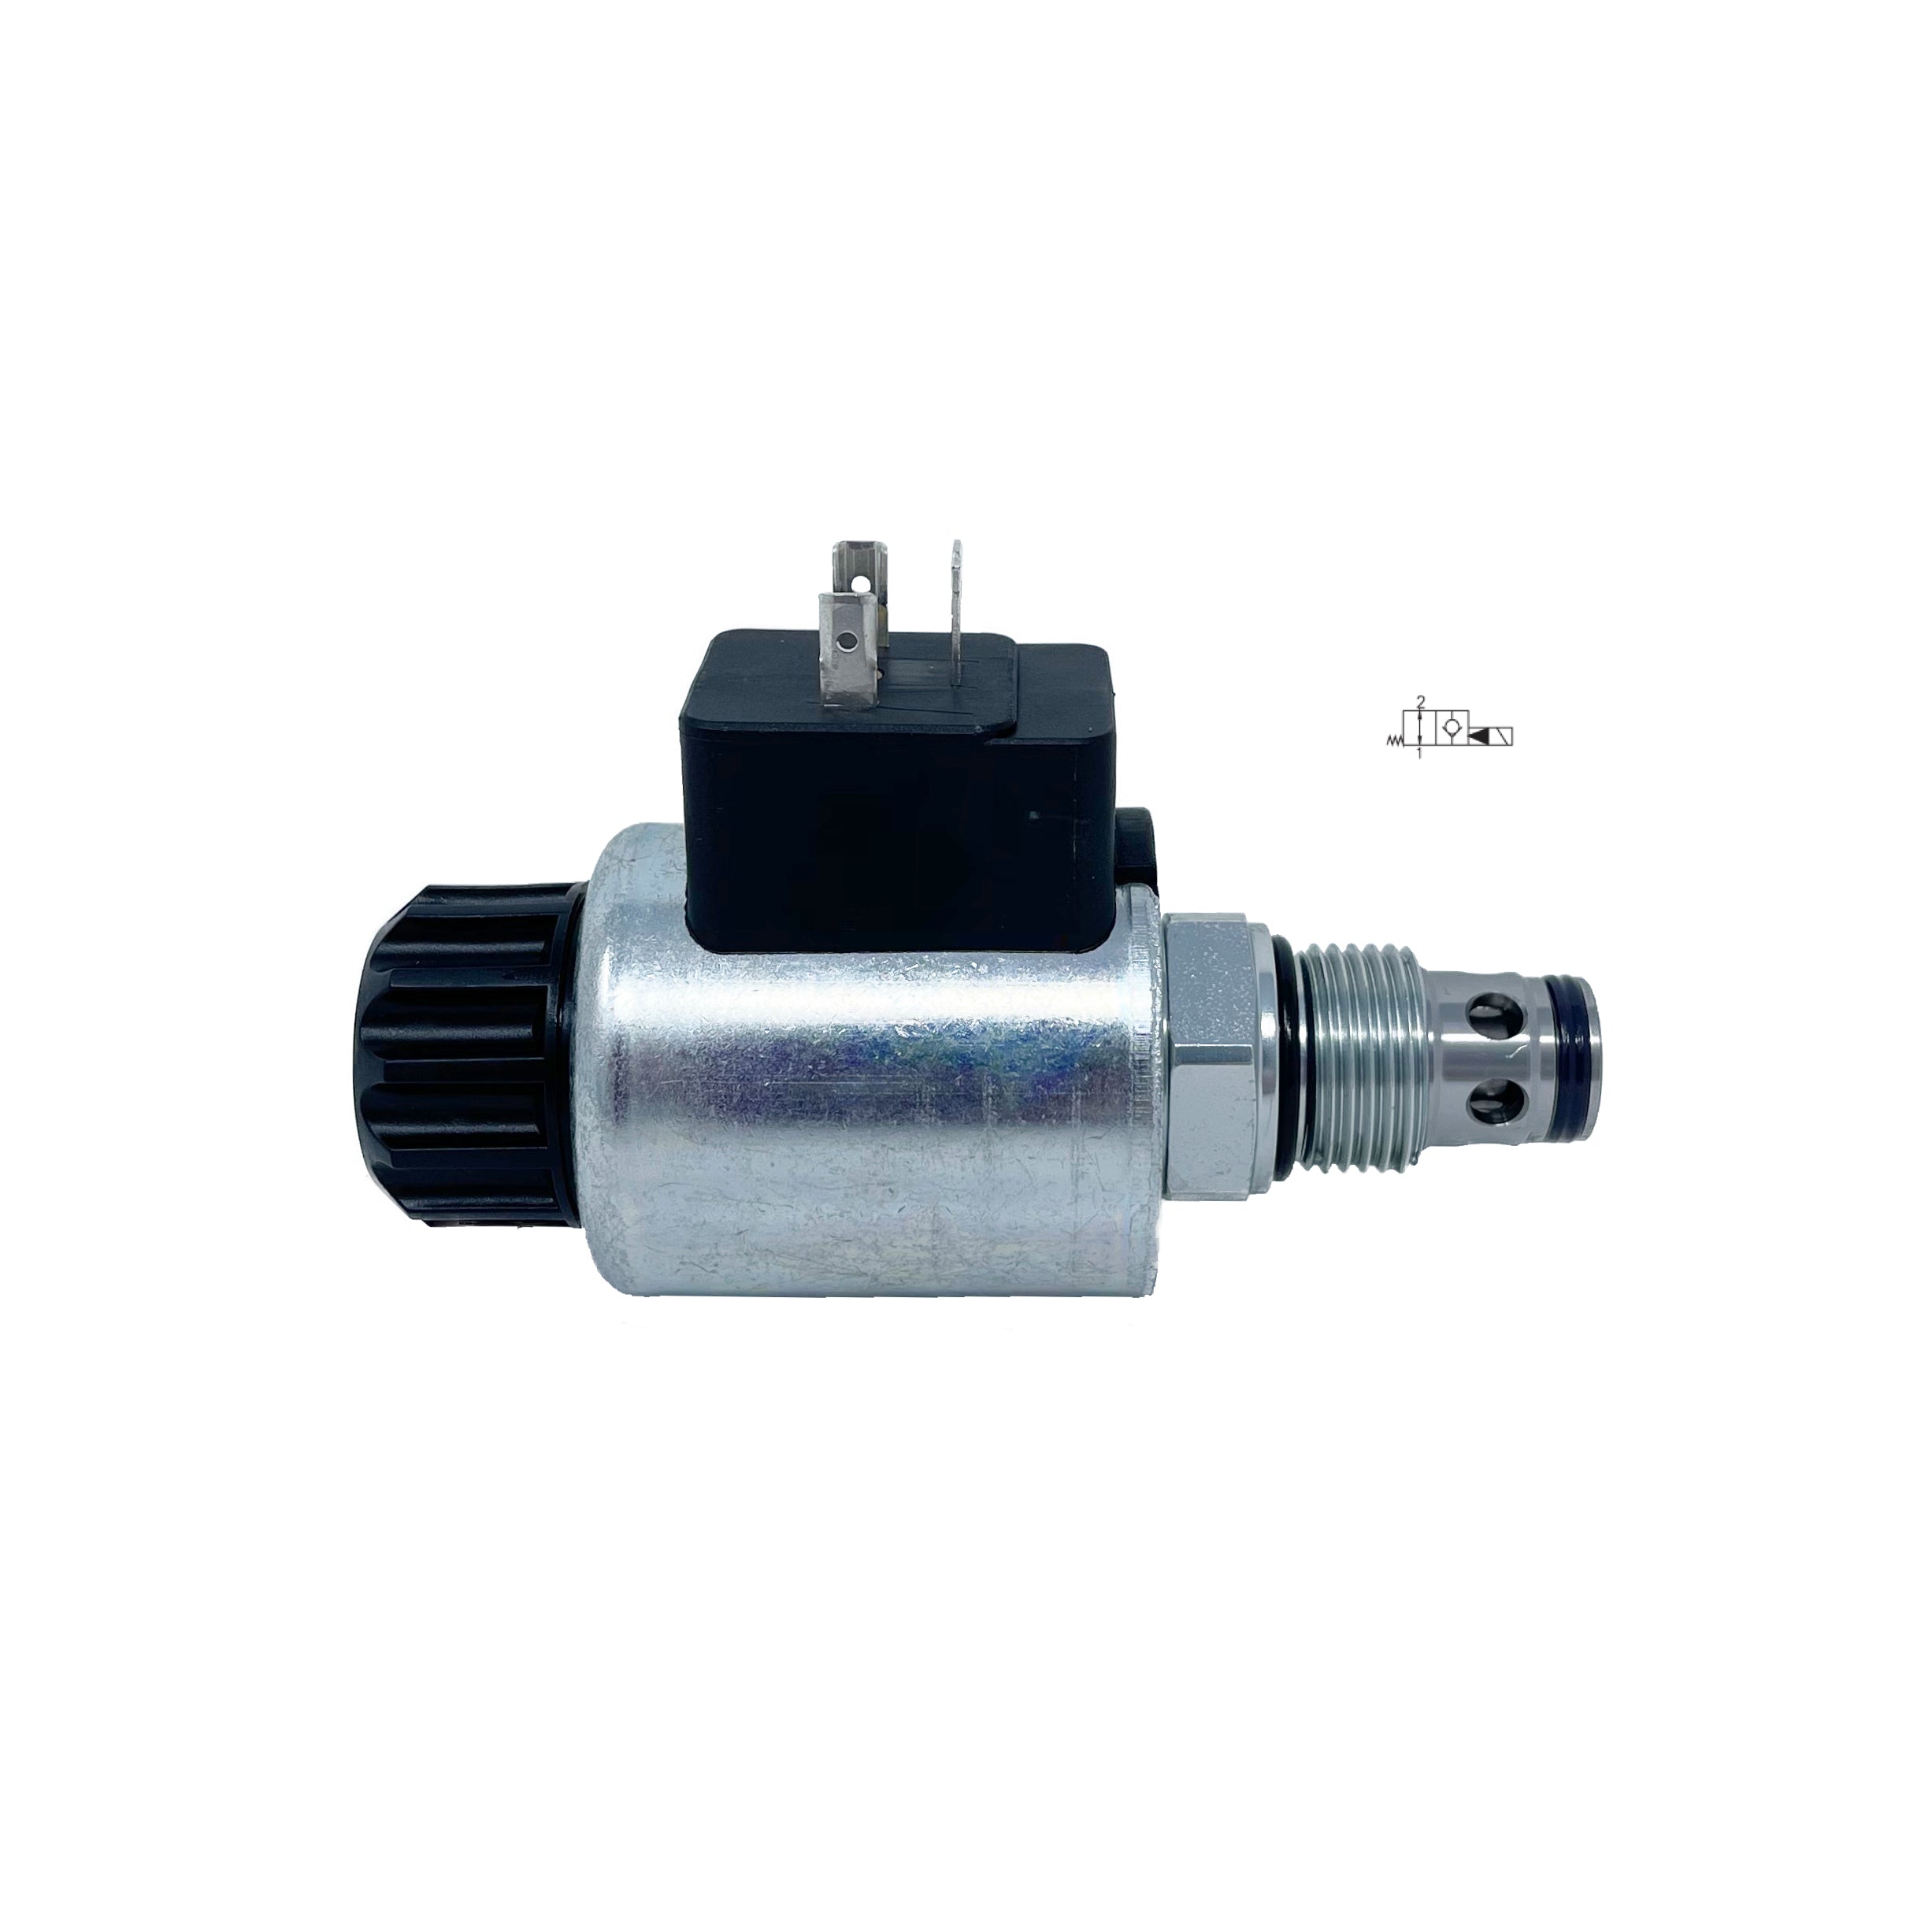 SD3E-B2/H2O2A12DIN : Argo DCV, 16GPM, 5100psi, 2P2W, C-10-2, 12 VDC DIN, Flow 1 to 2 Neutral